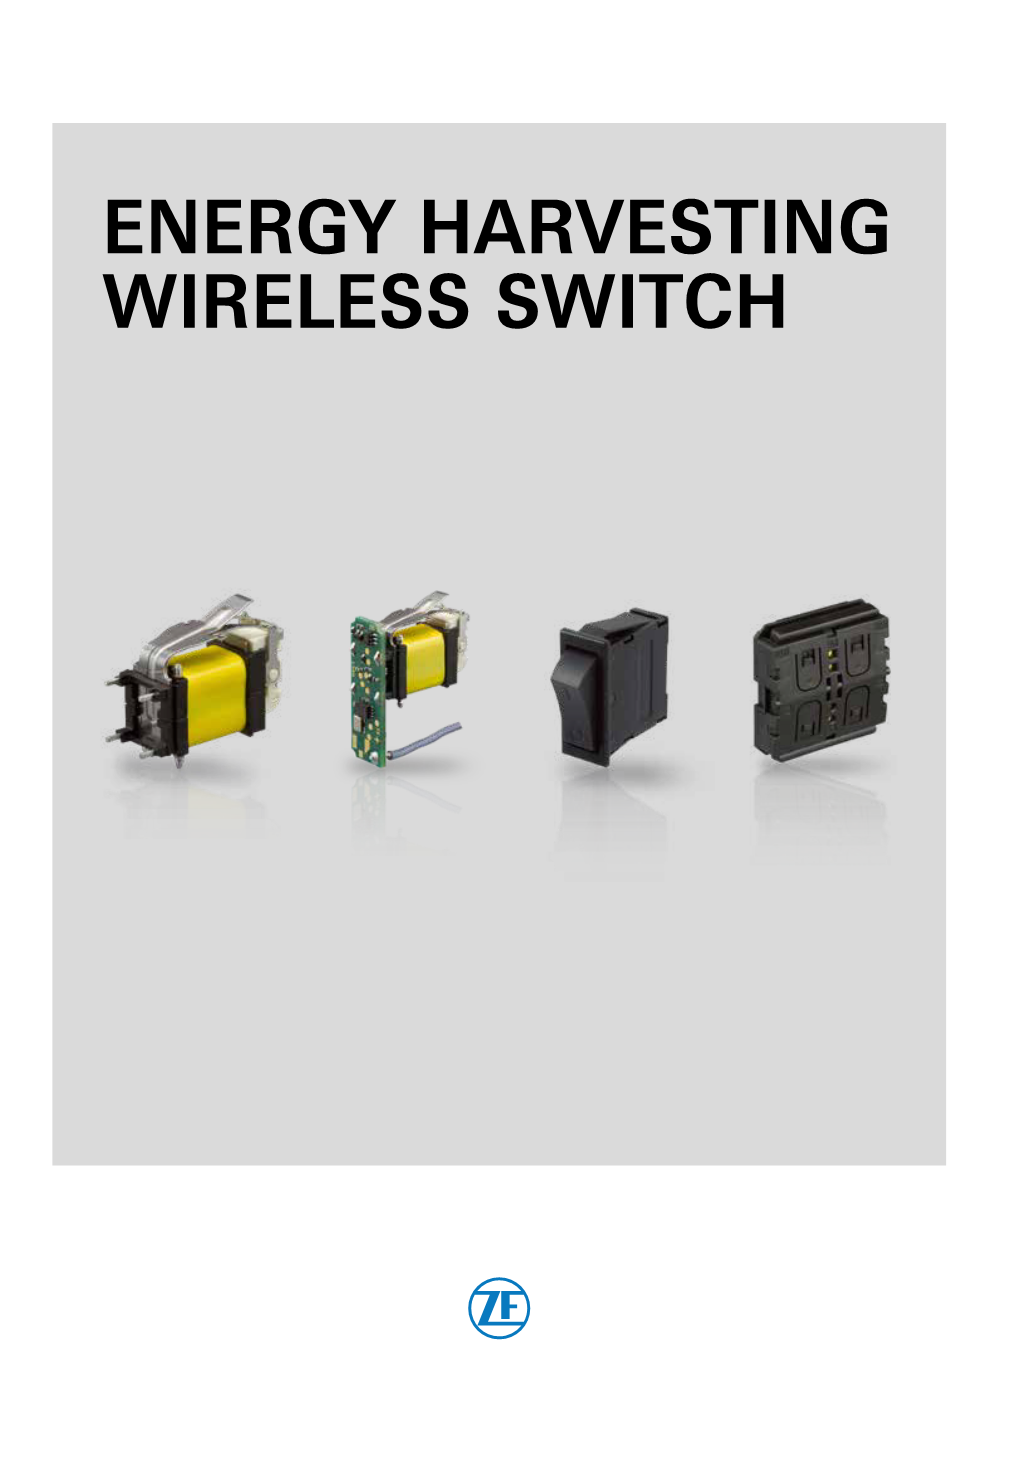 ENERGY HARVESTING WIRELESS SWITCH Page 4 / 5